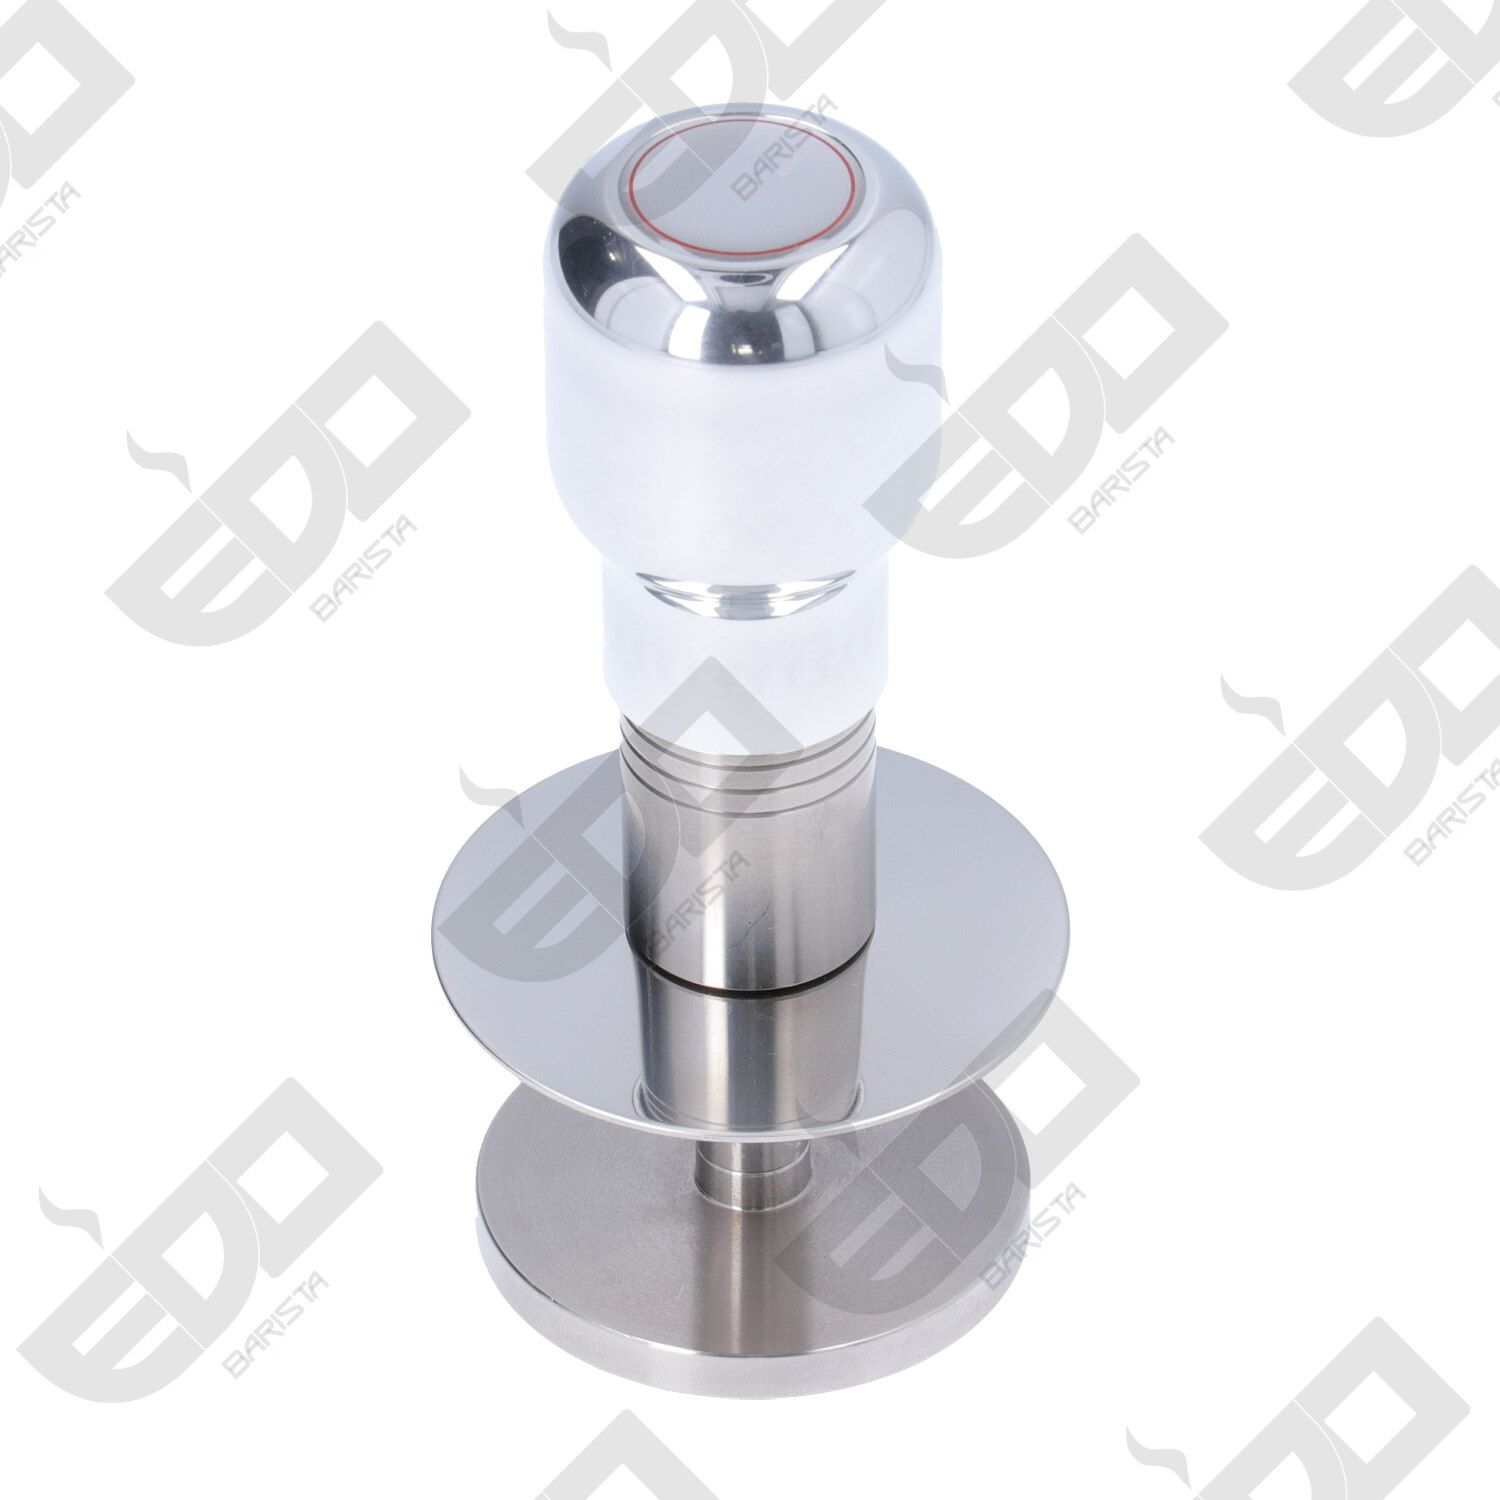 ADJUSTABLE DYNAMOMETRIC STAINLESS STEEL TAMPER WITH 58MM DISC